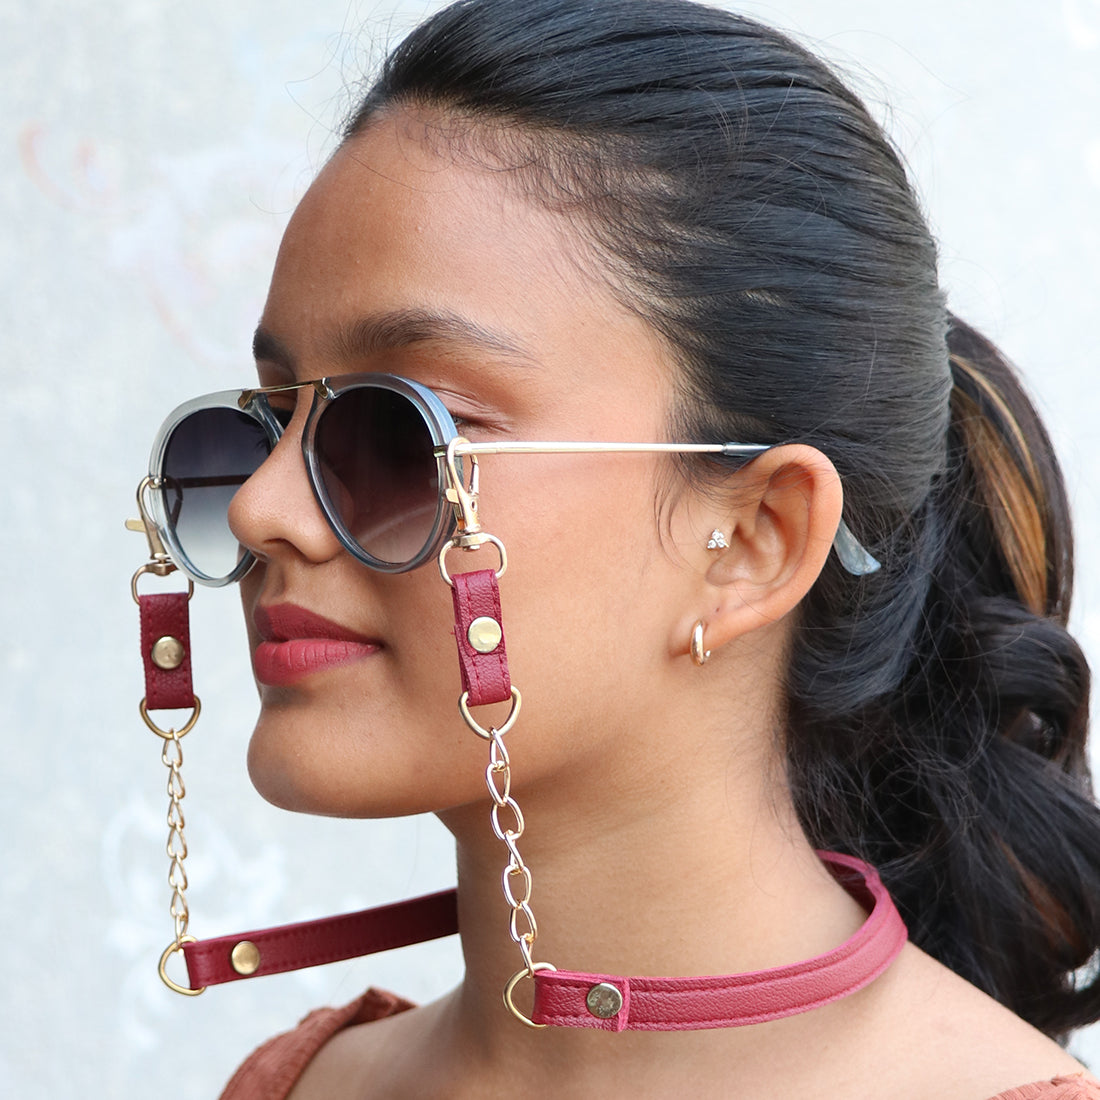 METALLIC GOLD-TONED CHAIN-LINK & MAROON LEATHER MASK CHAIN OR SUNGLASS CHAIN